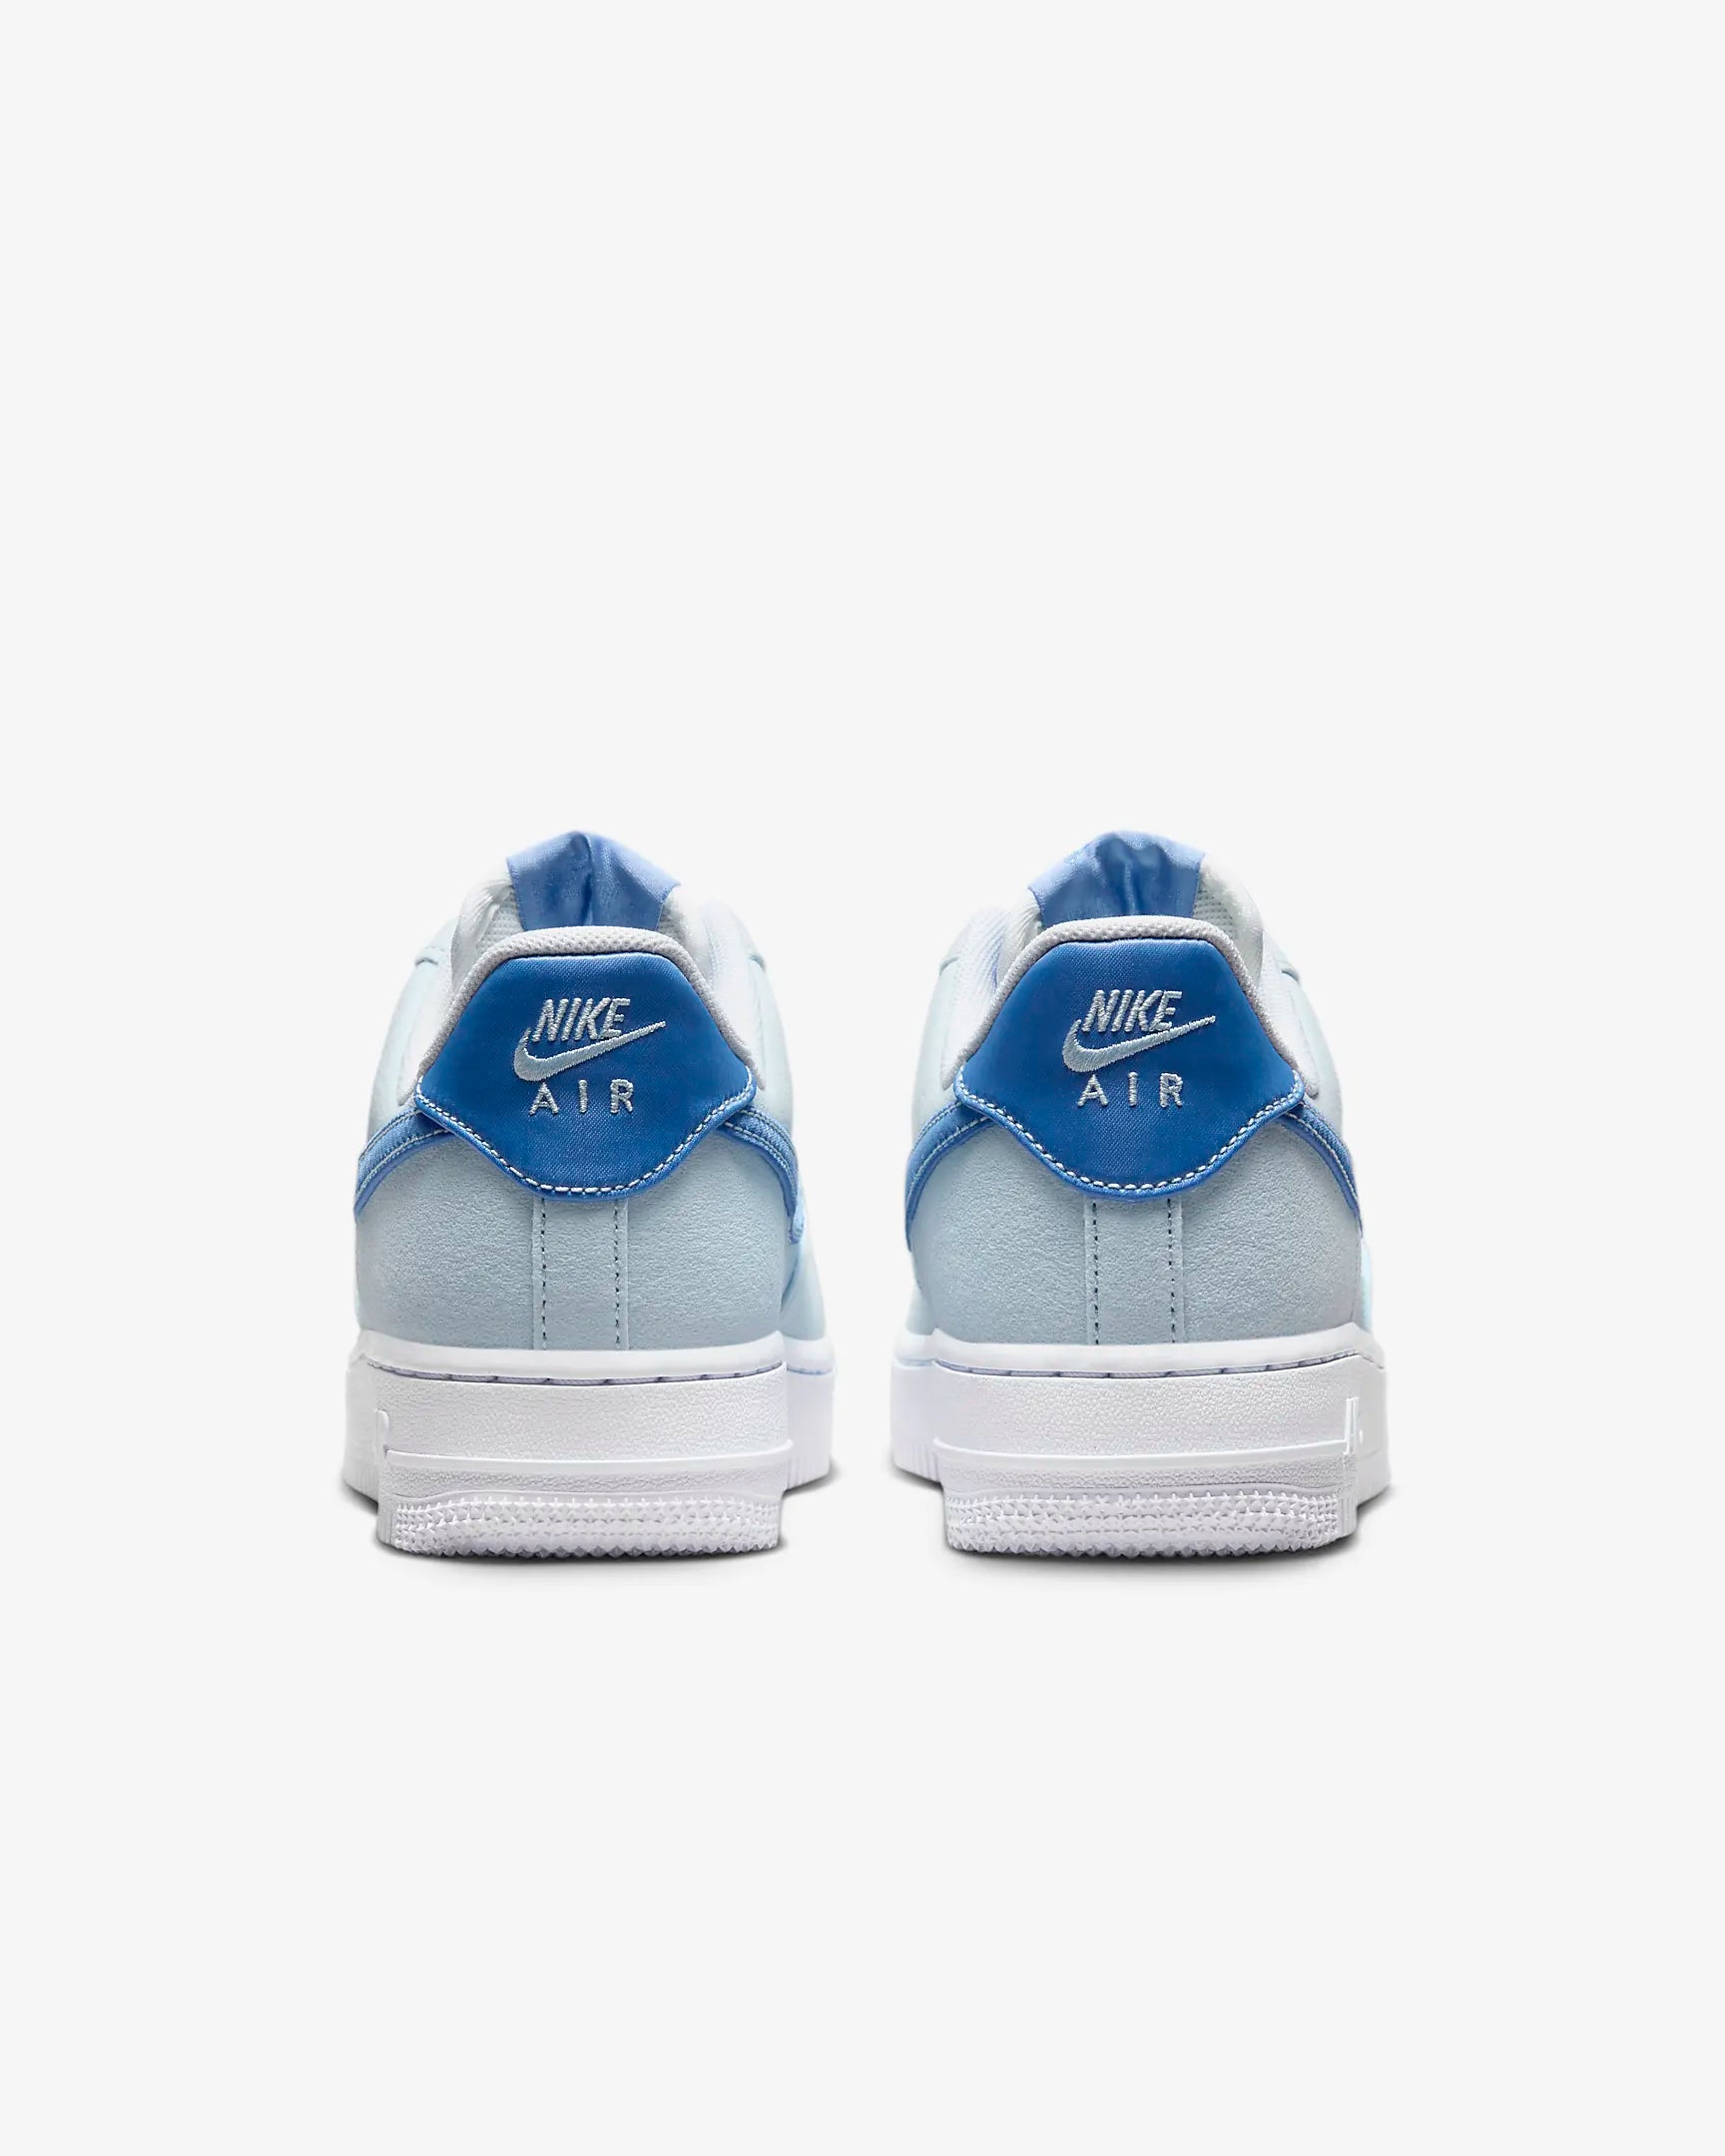 Women's Nike Air Force 1 '07 'Shades of Blue'